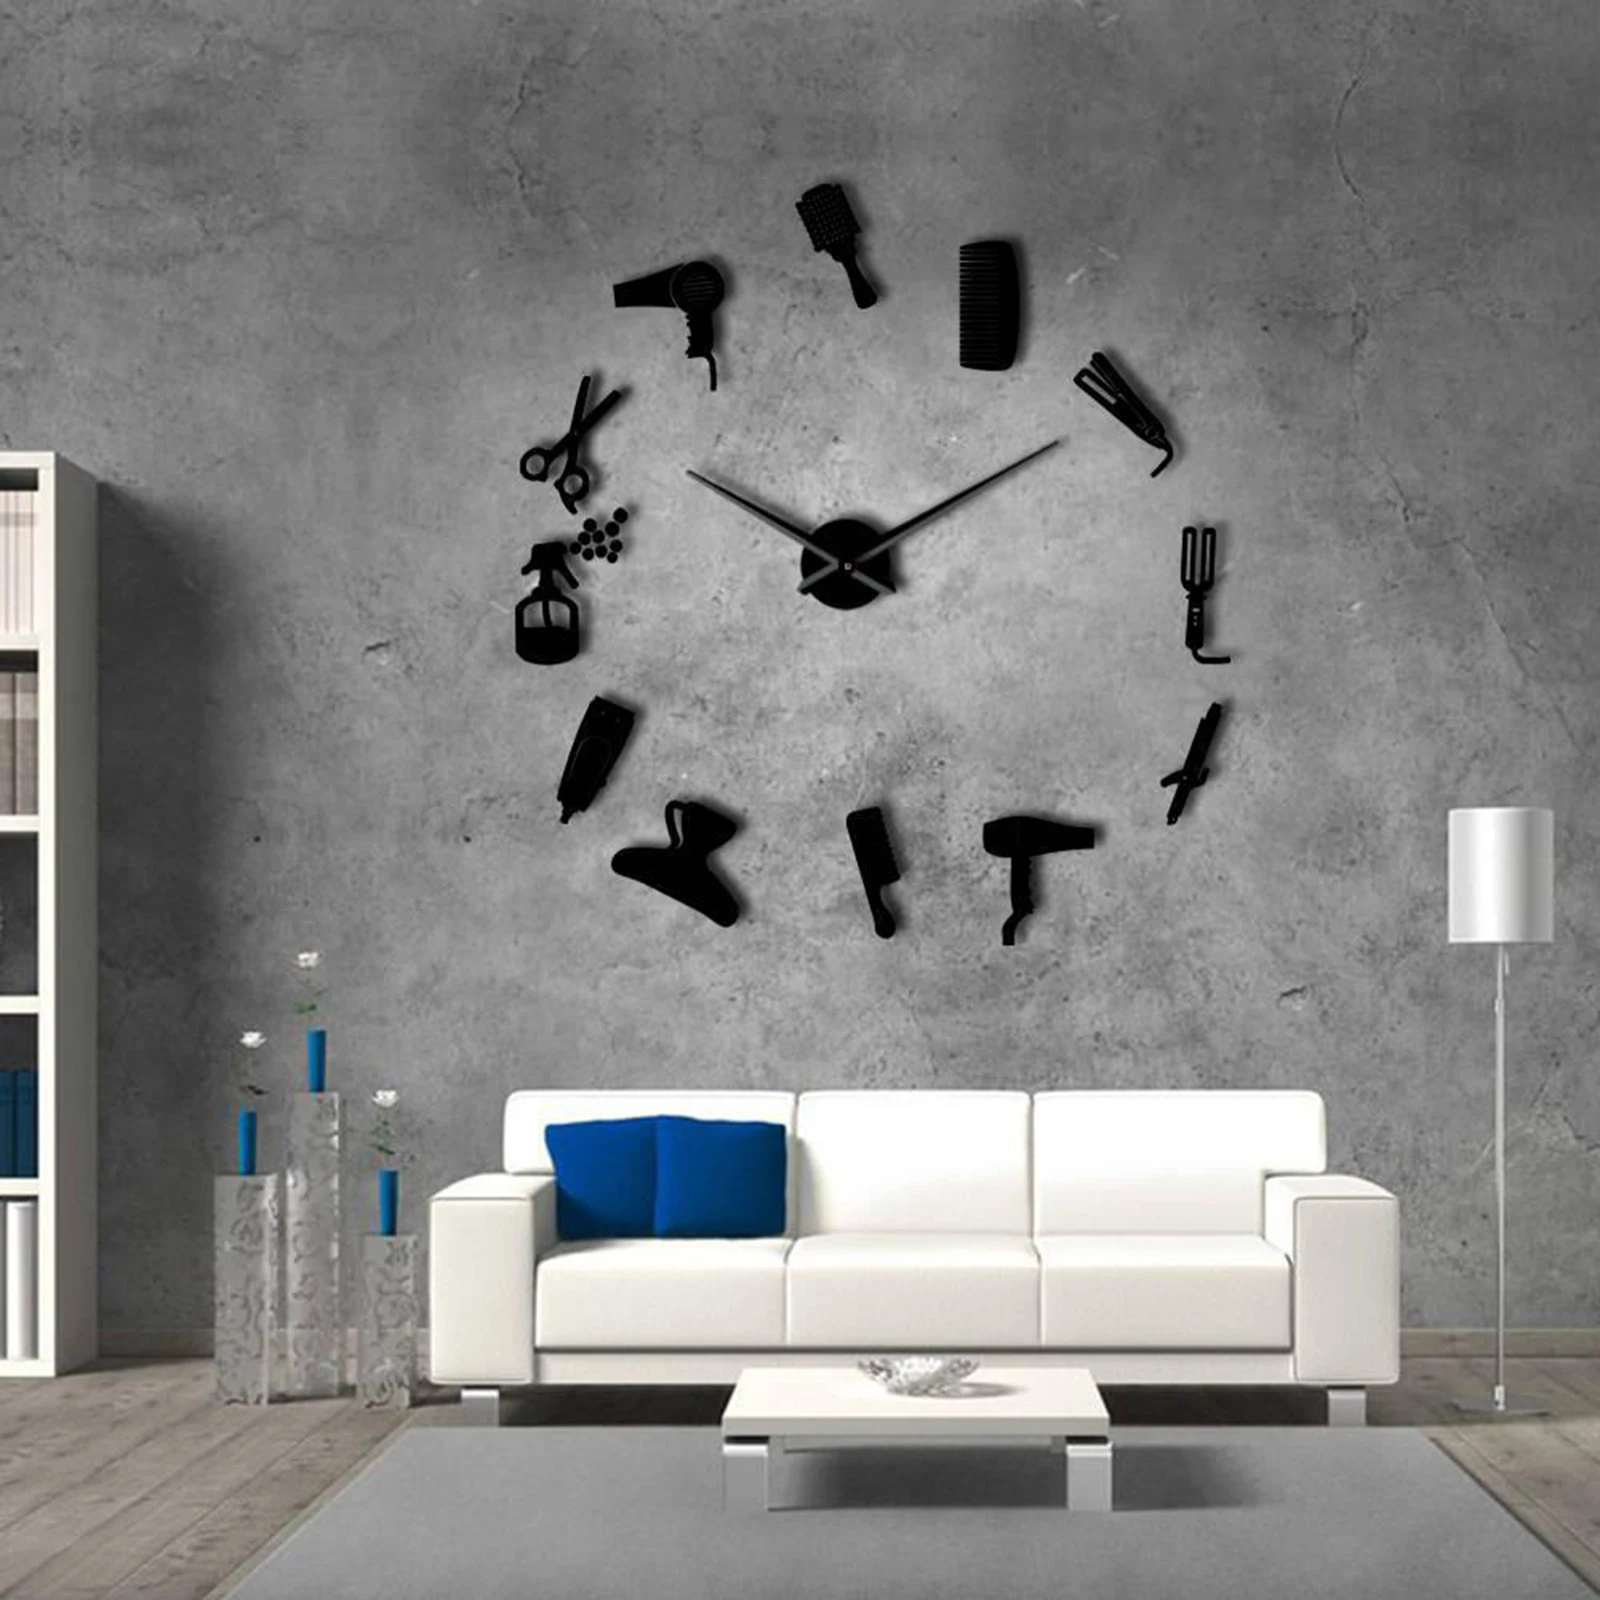 Acrylic Mirror DIY Wall Clock Watch 3D Wall Stickers Large for Living Room Bedroom Office